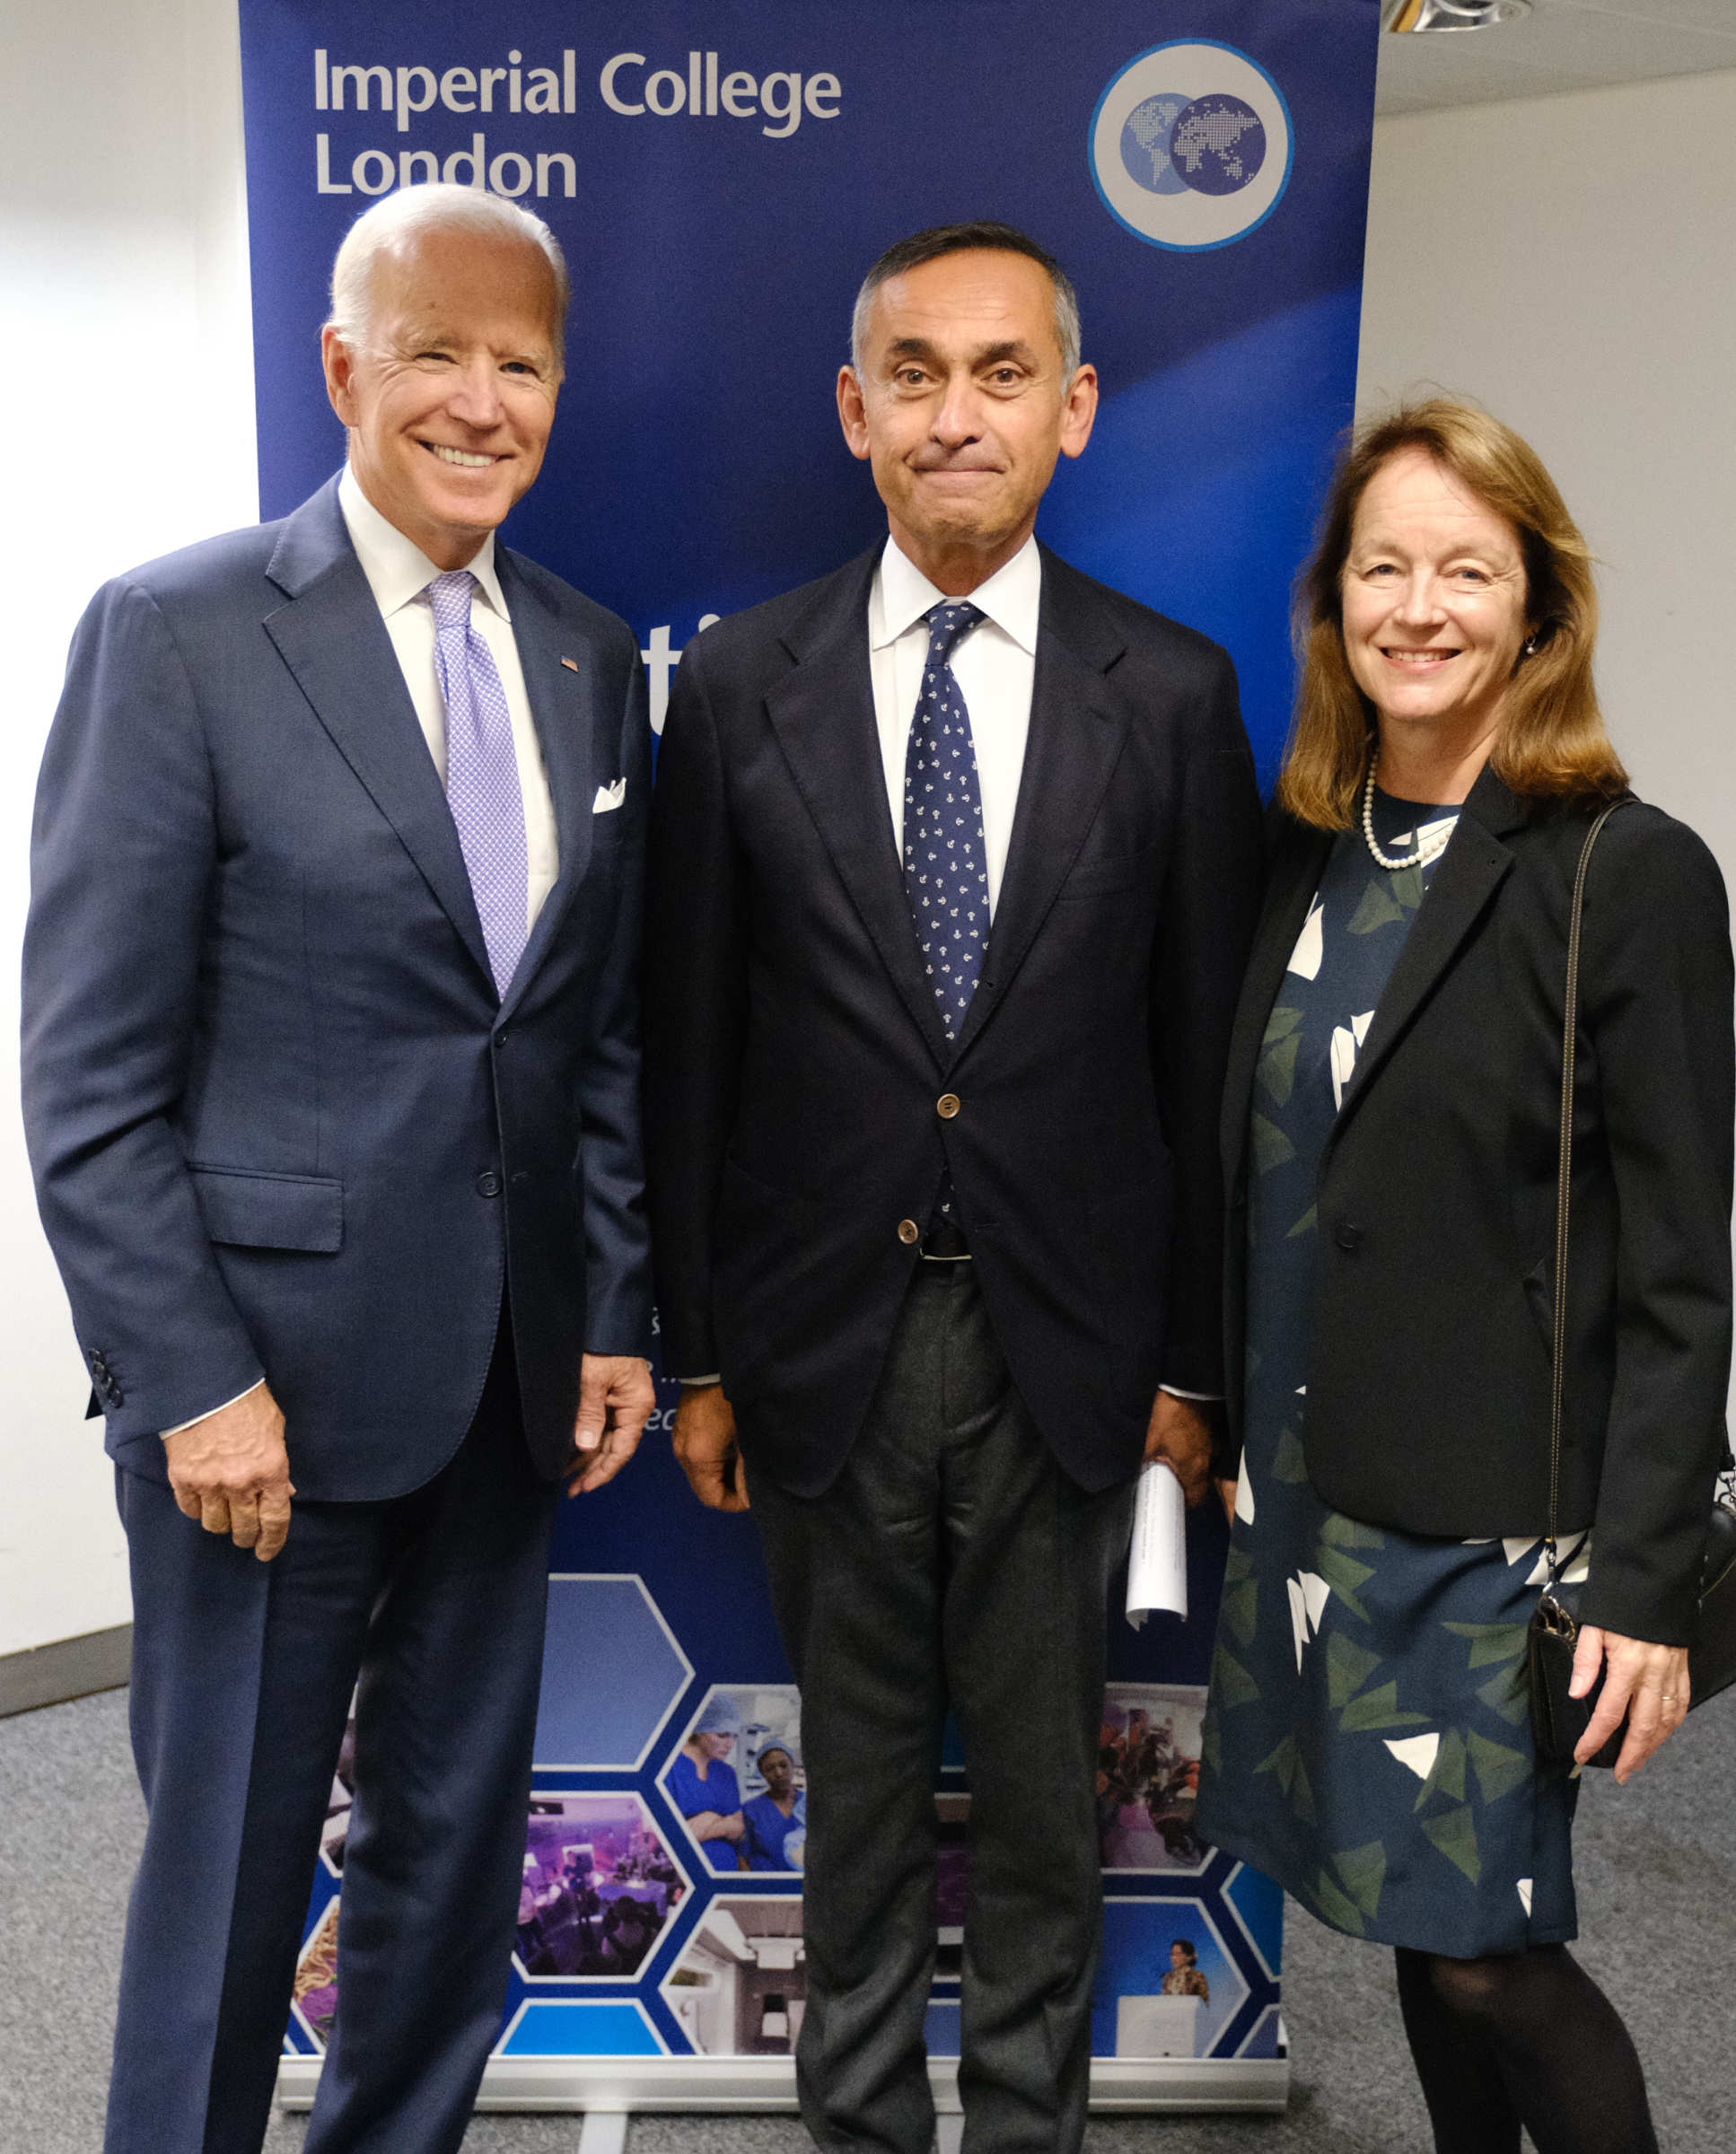 Vice President Biden met President Gast and Lord Darzi to discuss Imperial's new cancer centre